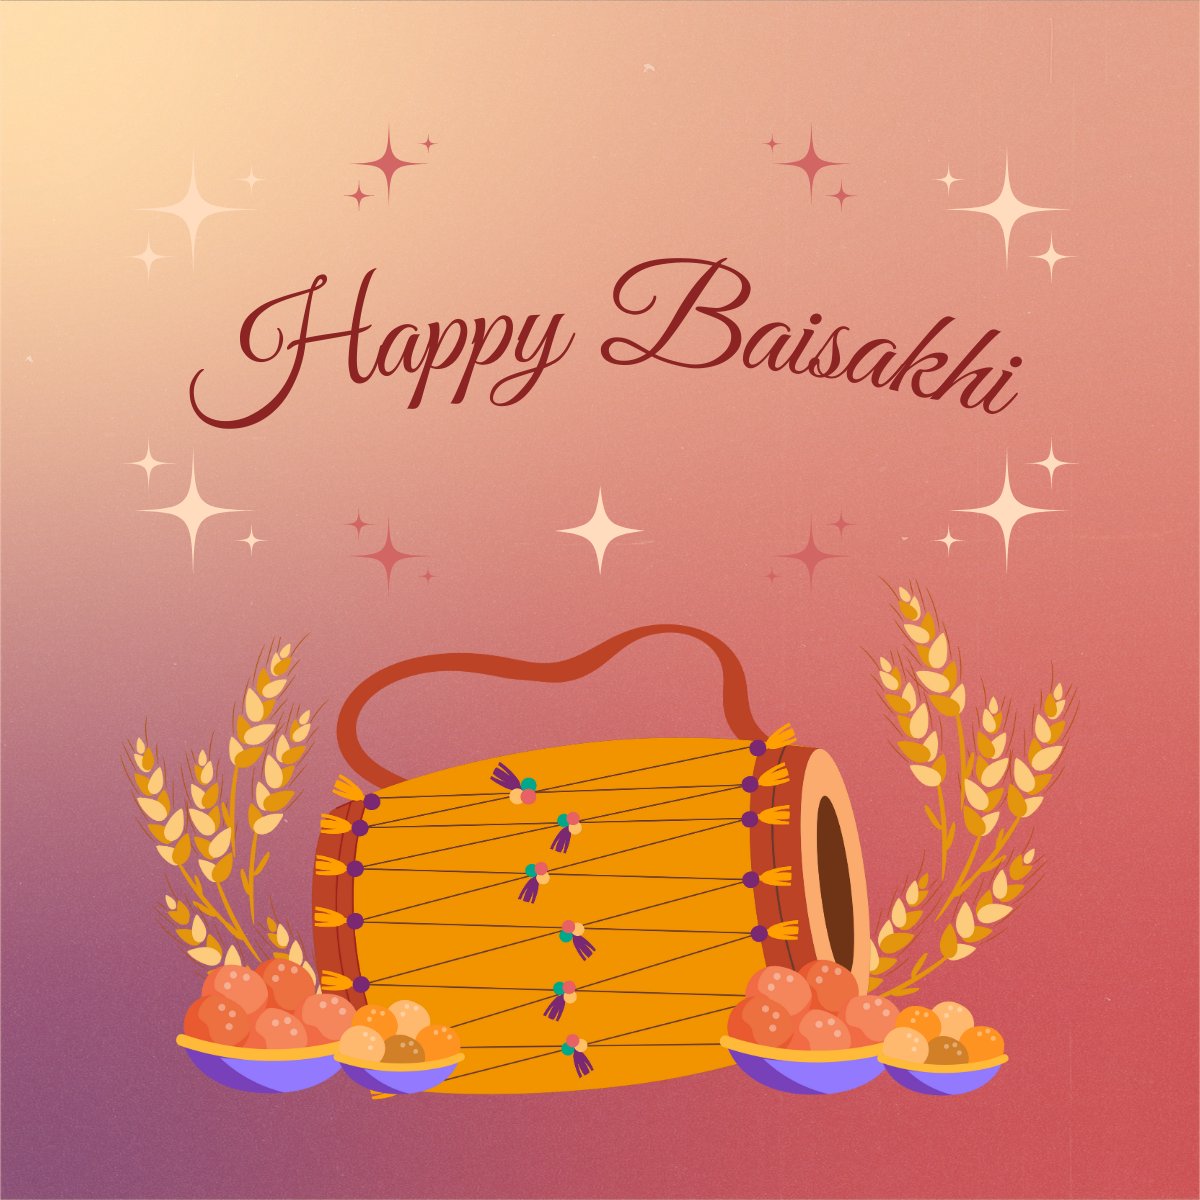 We're sending our best wishes to those observing the Sikh #Baisakhi - an annual festival celebrating the creation of the Khalsa. 🧡Baisakhi marks a time for renewal, reflection and celebration for Sikhs worldwide.💙 #Vaisakhi #Sikhism